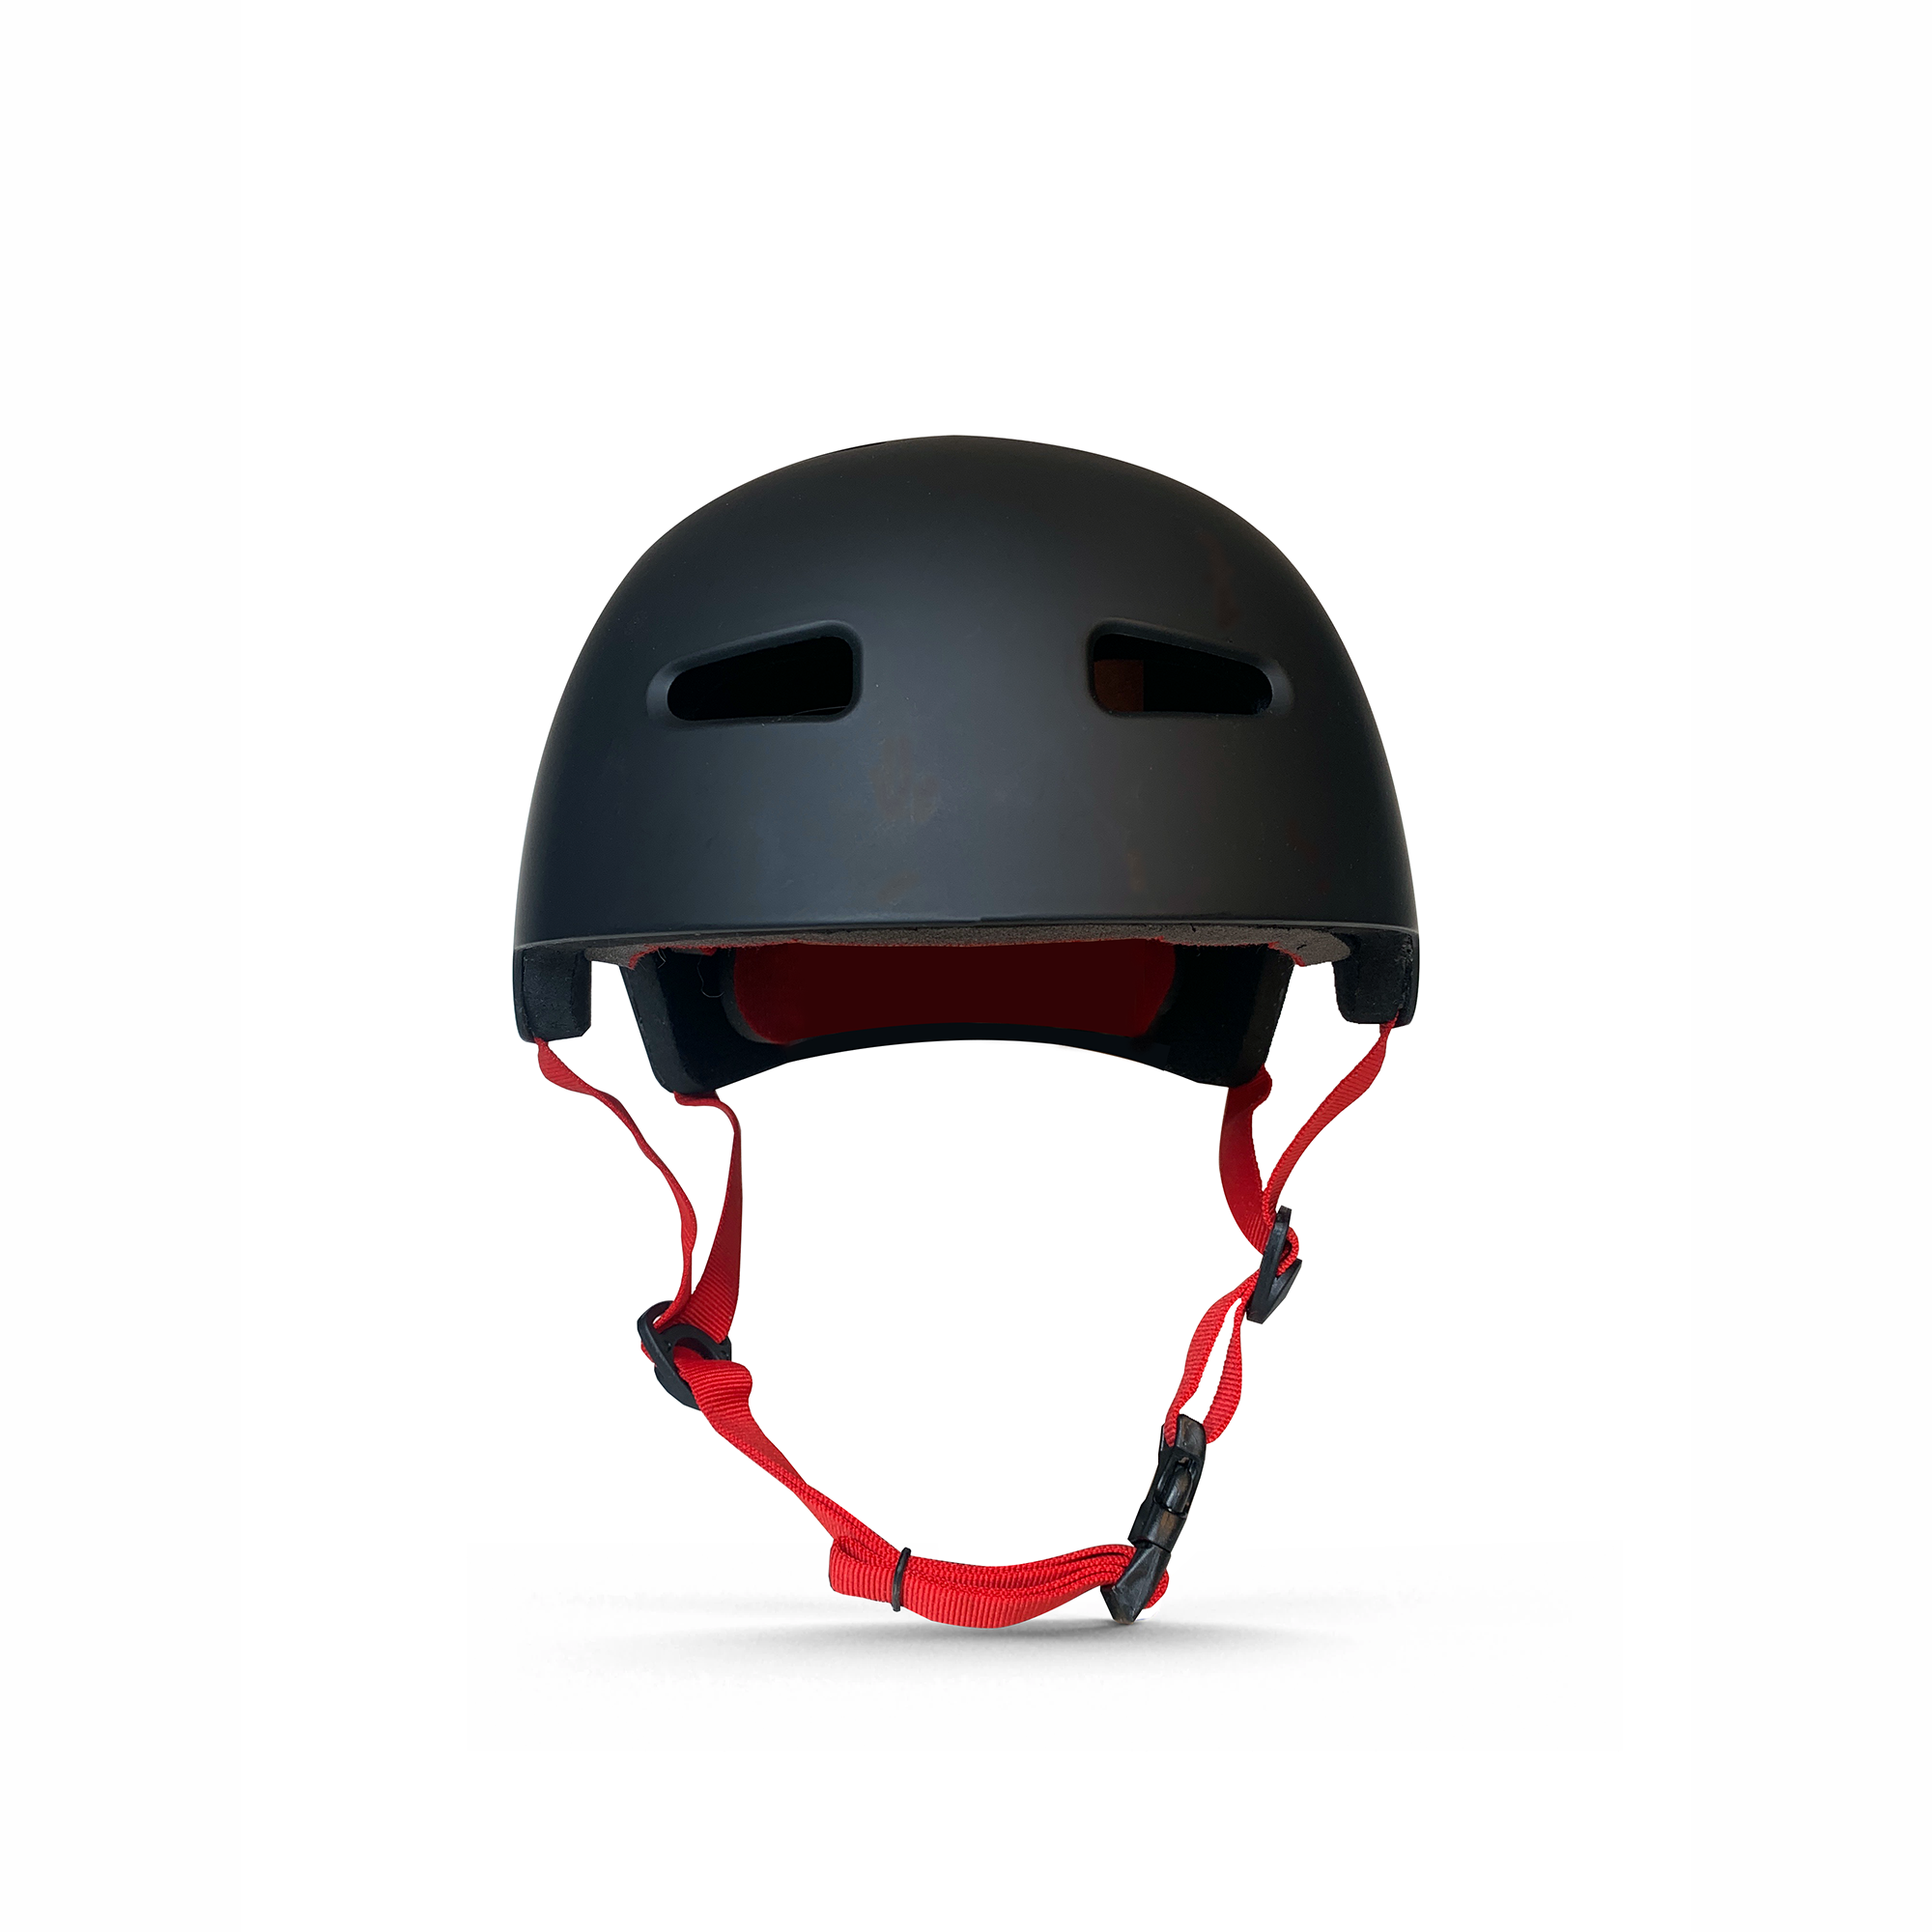 Destroyer Equipment: Bike & Skate Protective Gear with Style